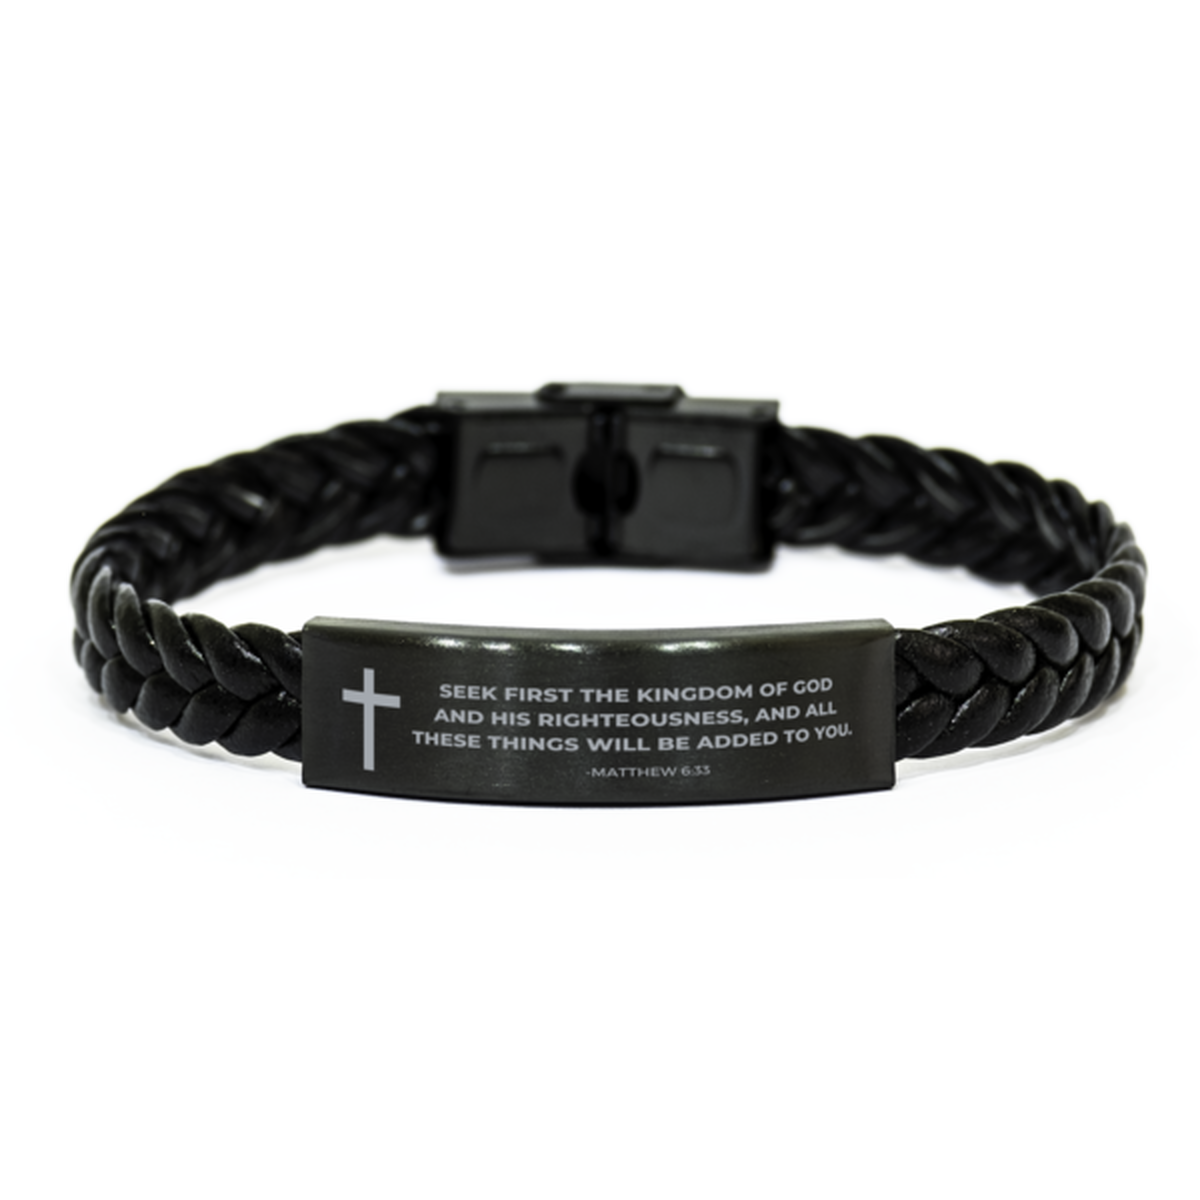 Baptism Gifts For Teenage Boys Girls, Christian Bible Verse Braided Leather Bracelet, Seek first the kingdom of God, Catholic Confirmation Gifts for Son, Godson, Grandson, Nephew